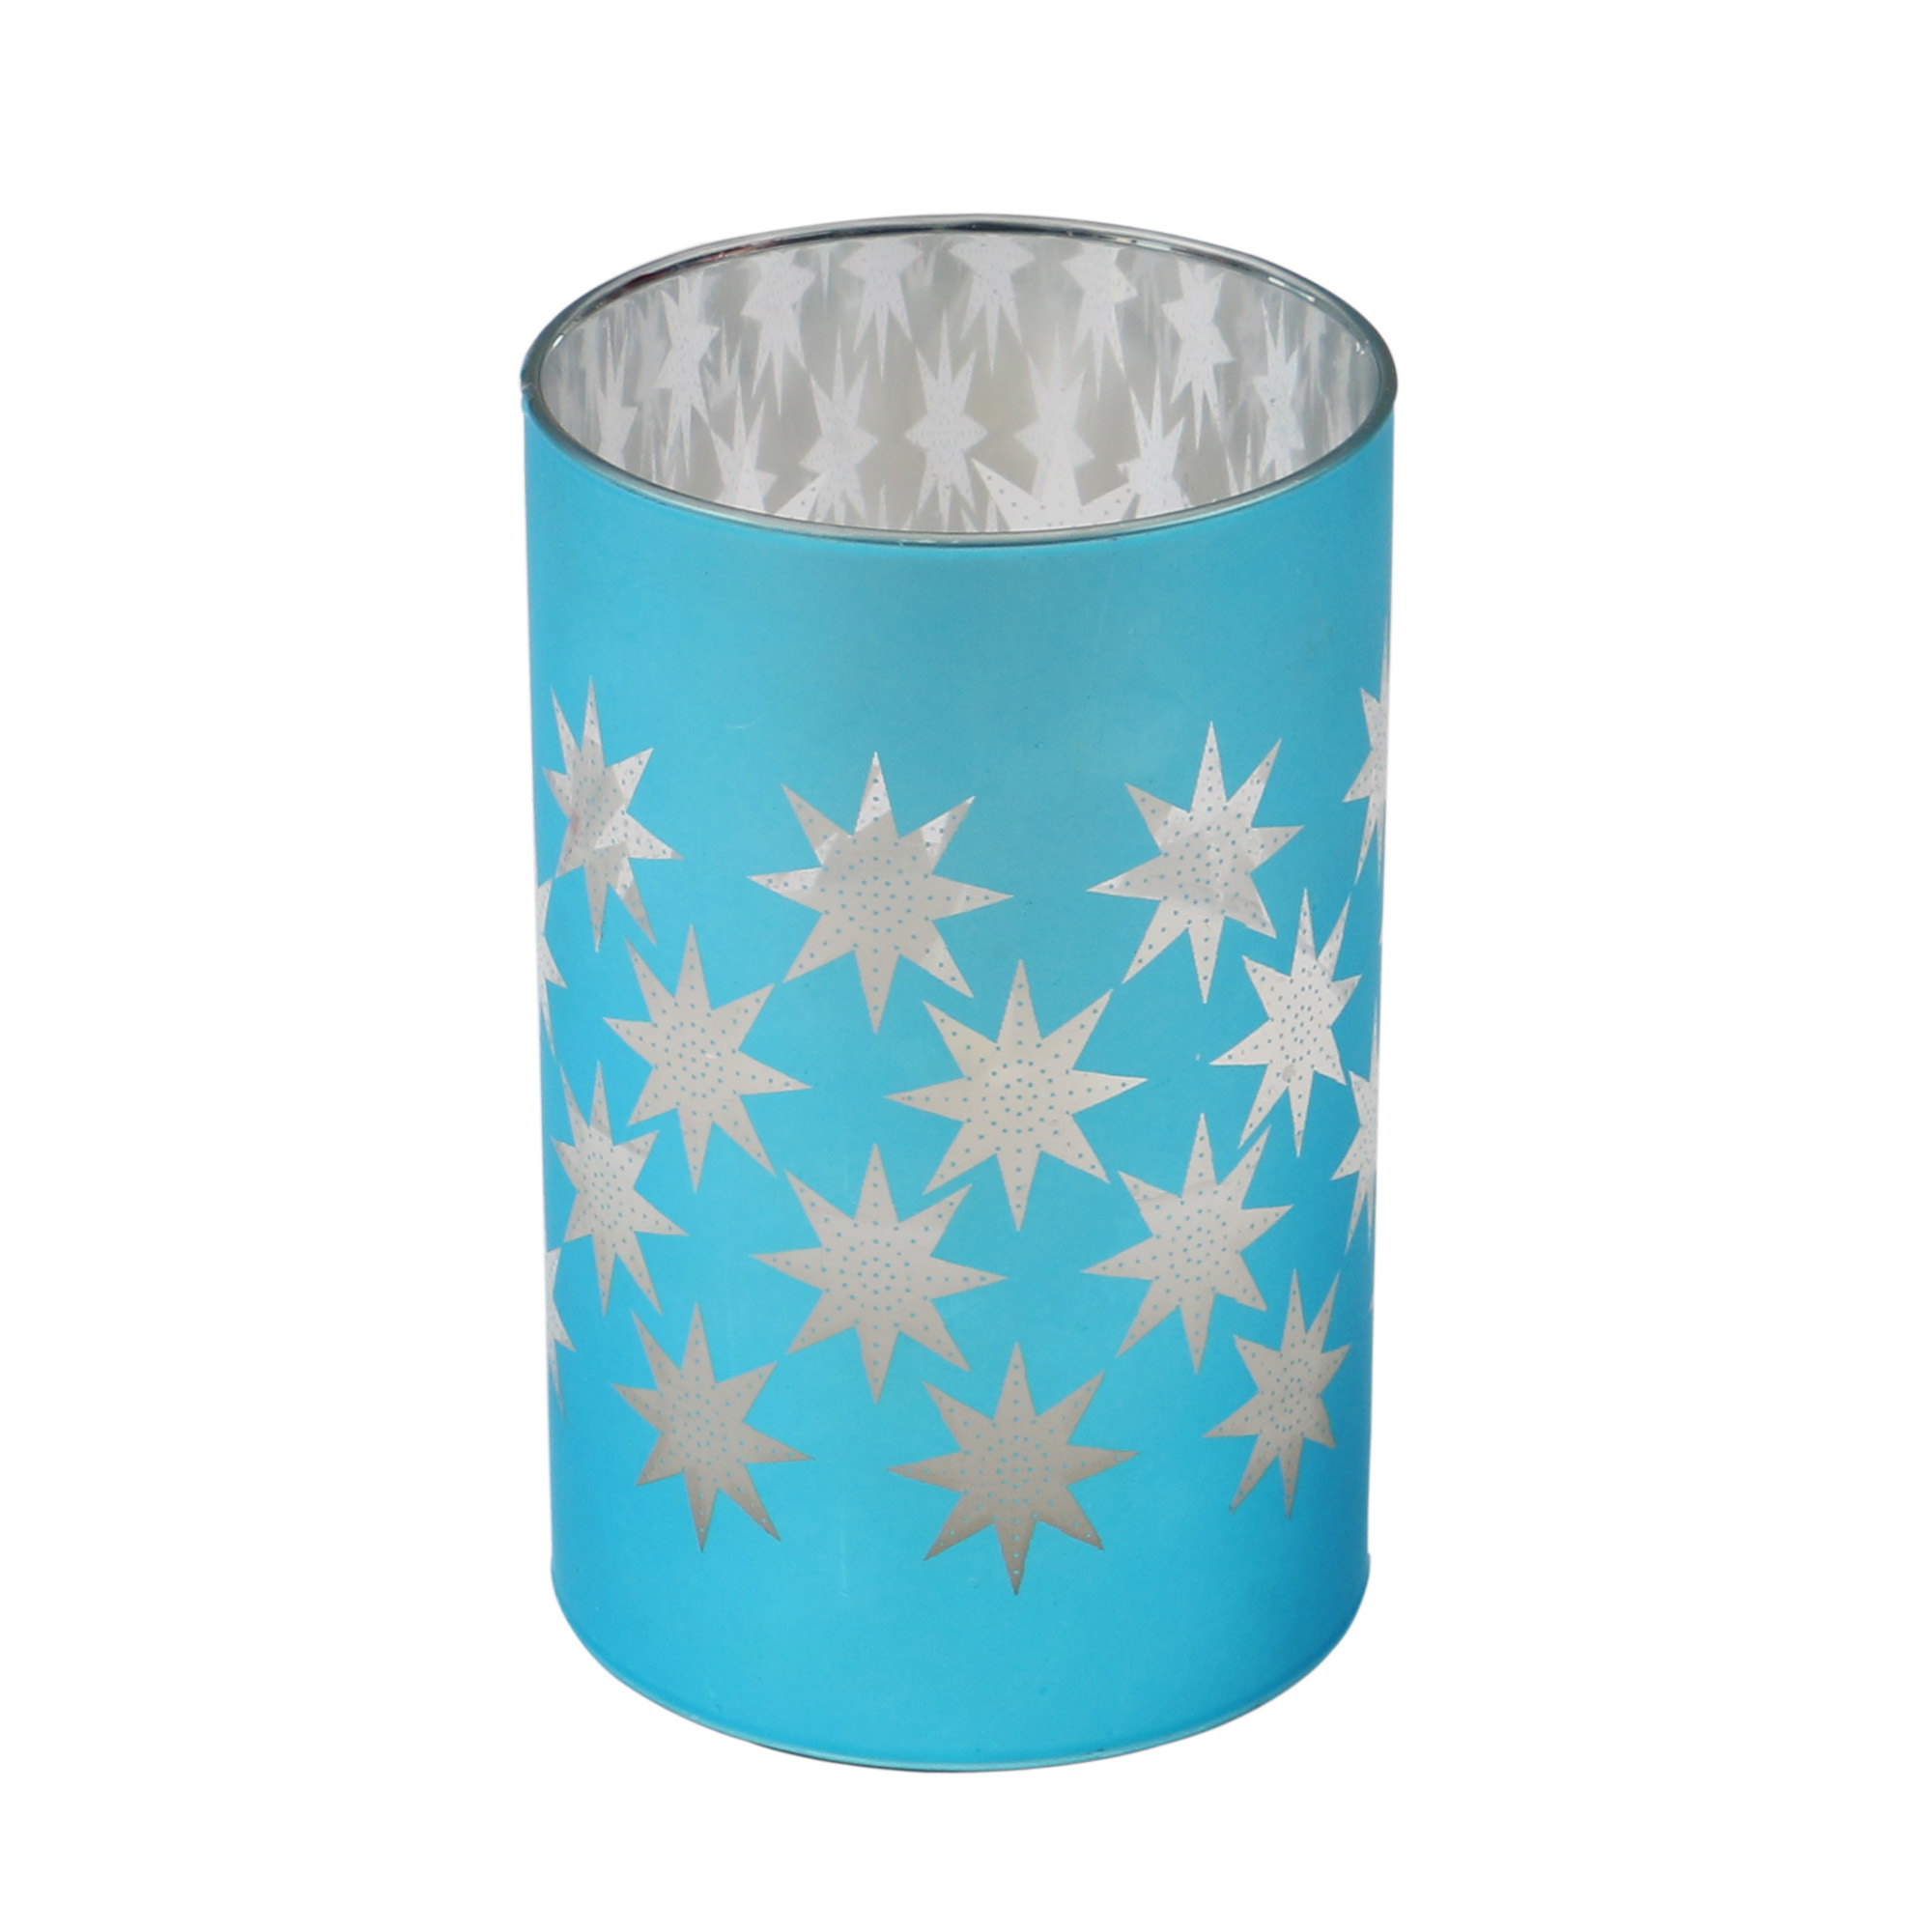 Metallic Colored Glass Filled LED Candle - BLUE